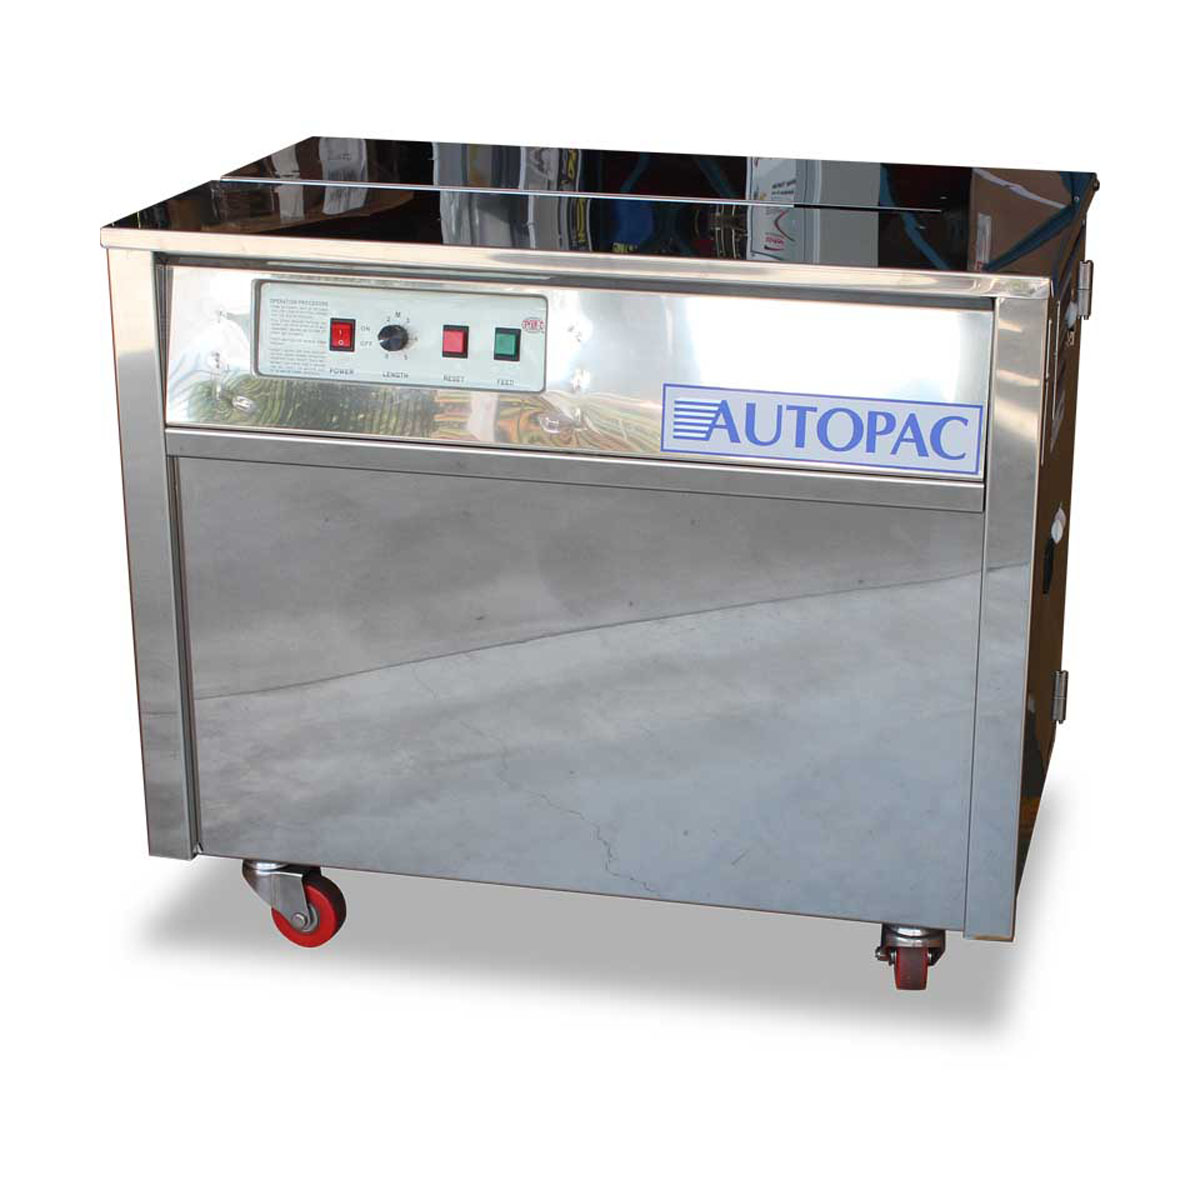 Buy Strapping Machine Archless in Strapping Machines from Autopac available at Astrolift NZ